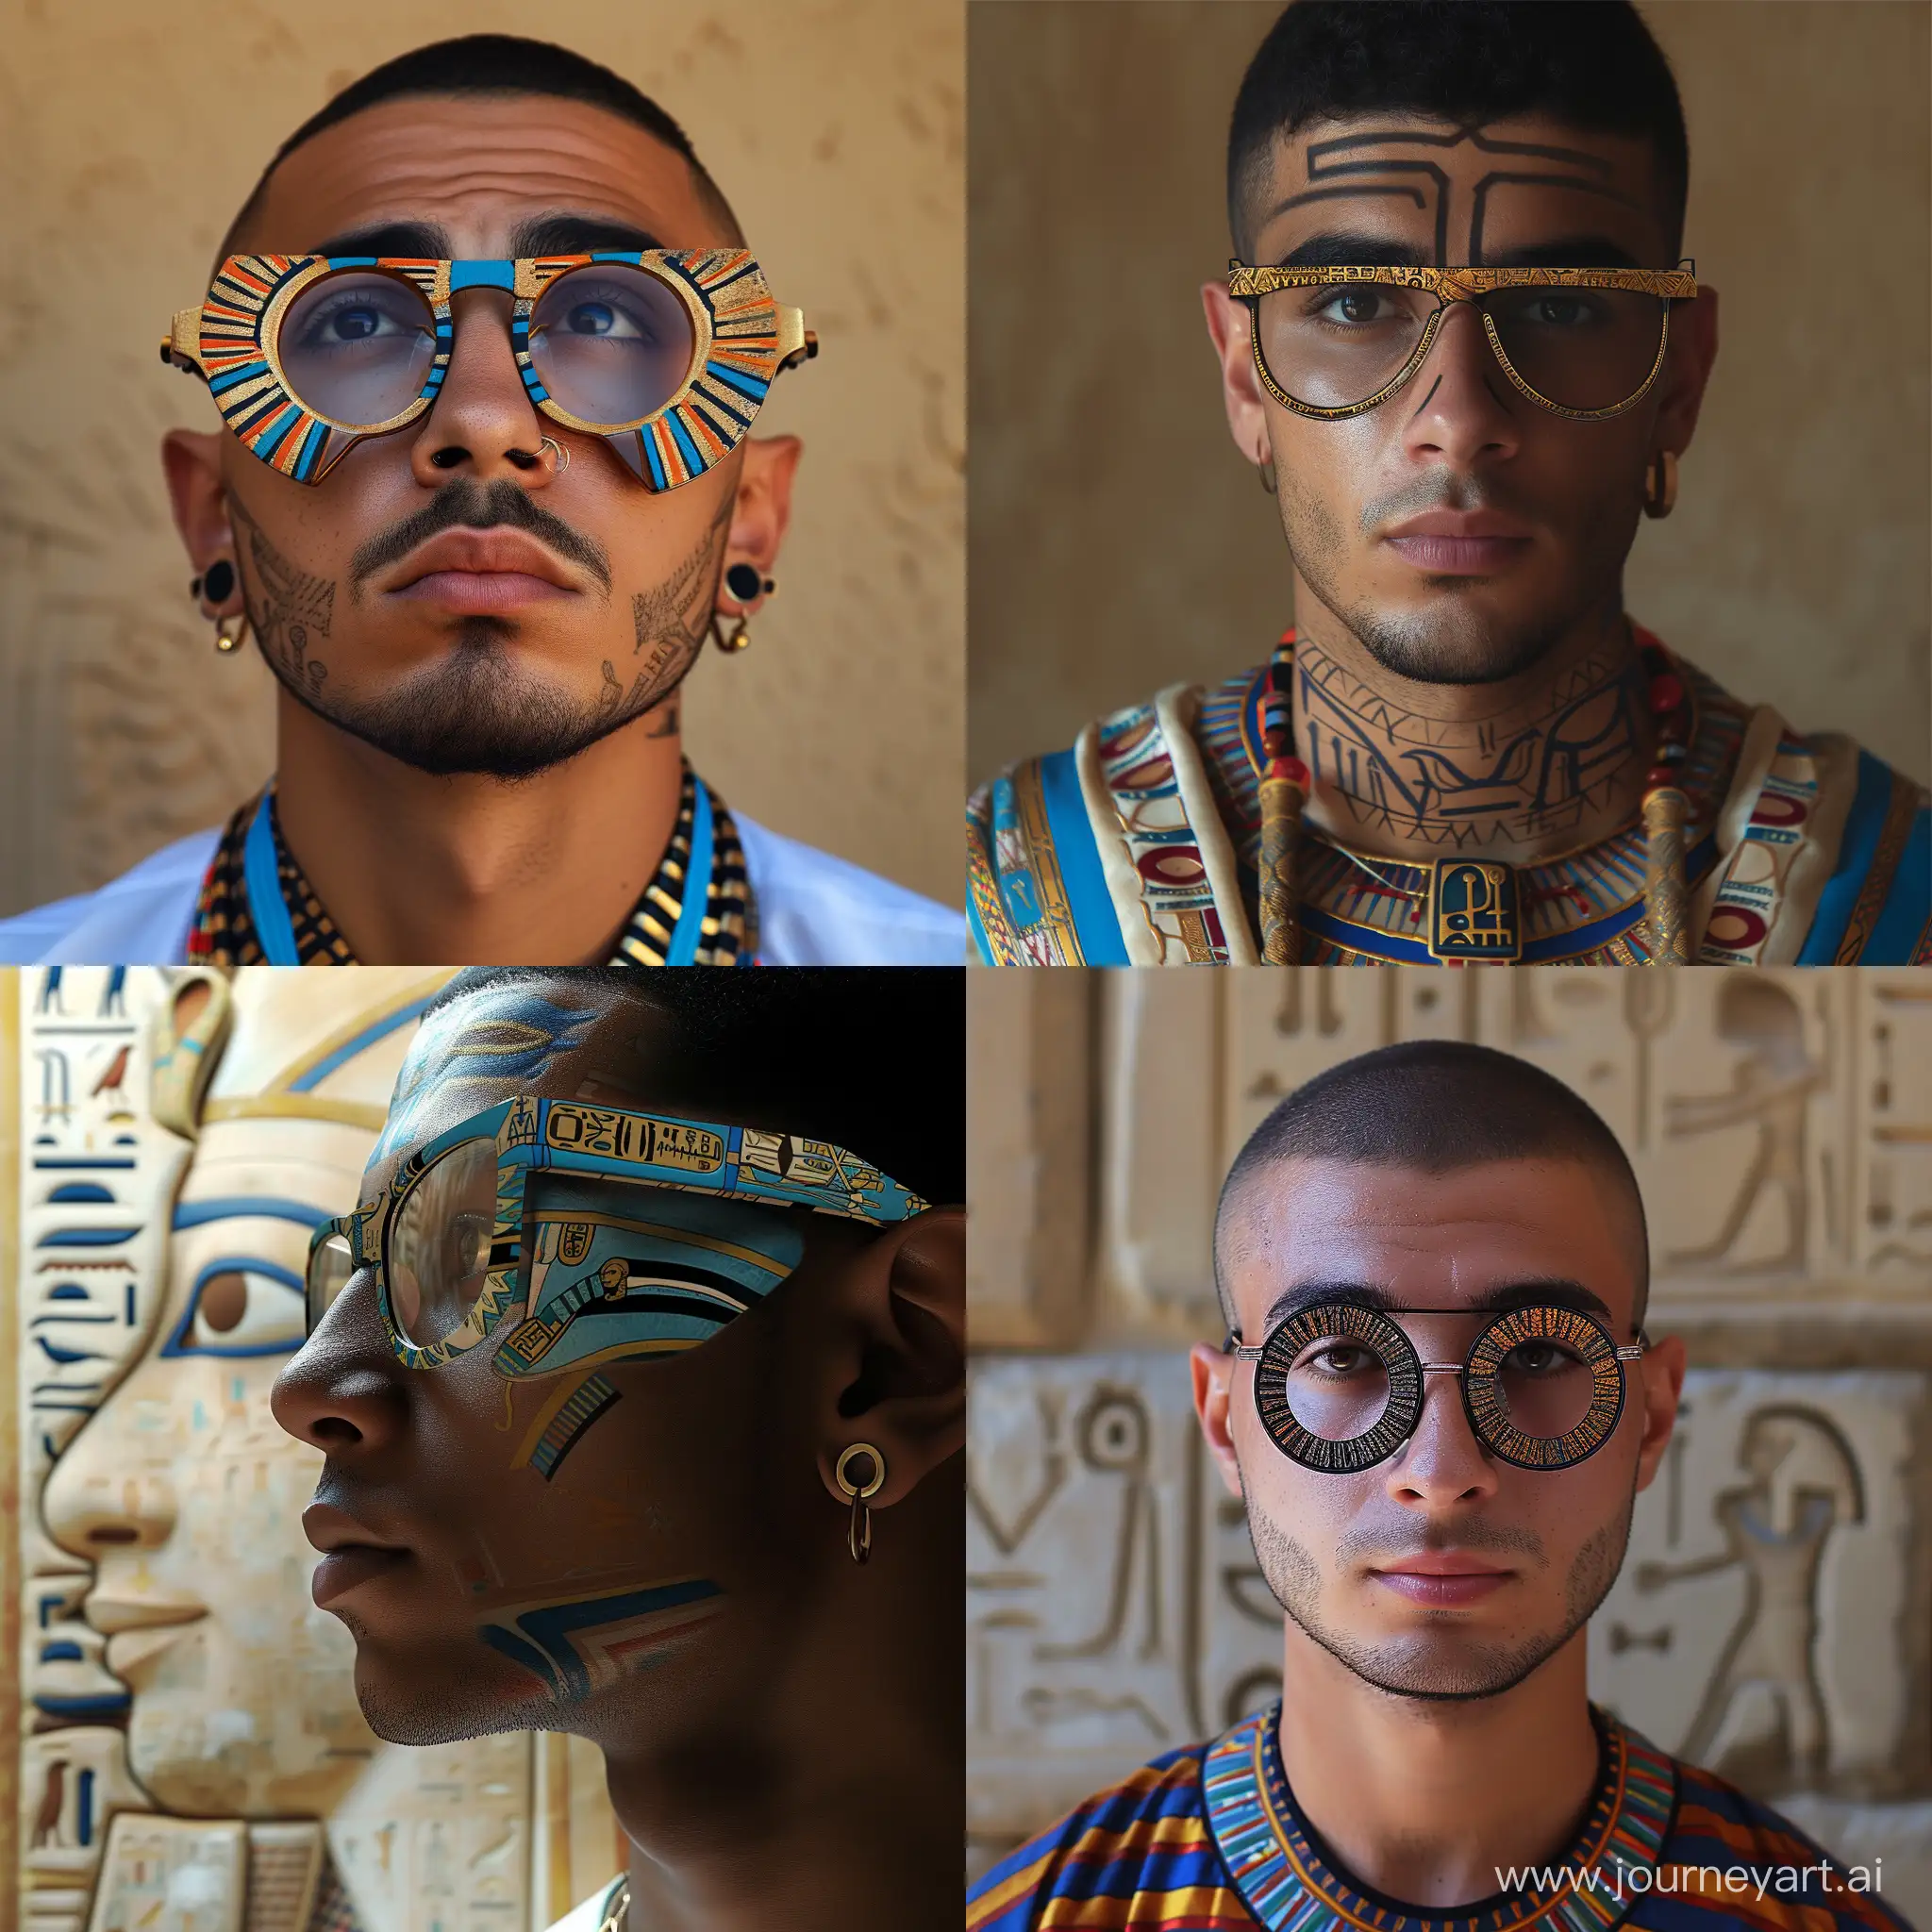 Make a picture for male called yassin wear a glasses with Pharaonic design - write (Yassin) as name on the picture